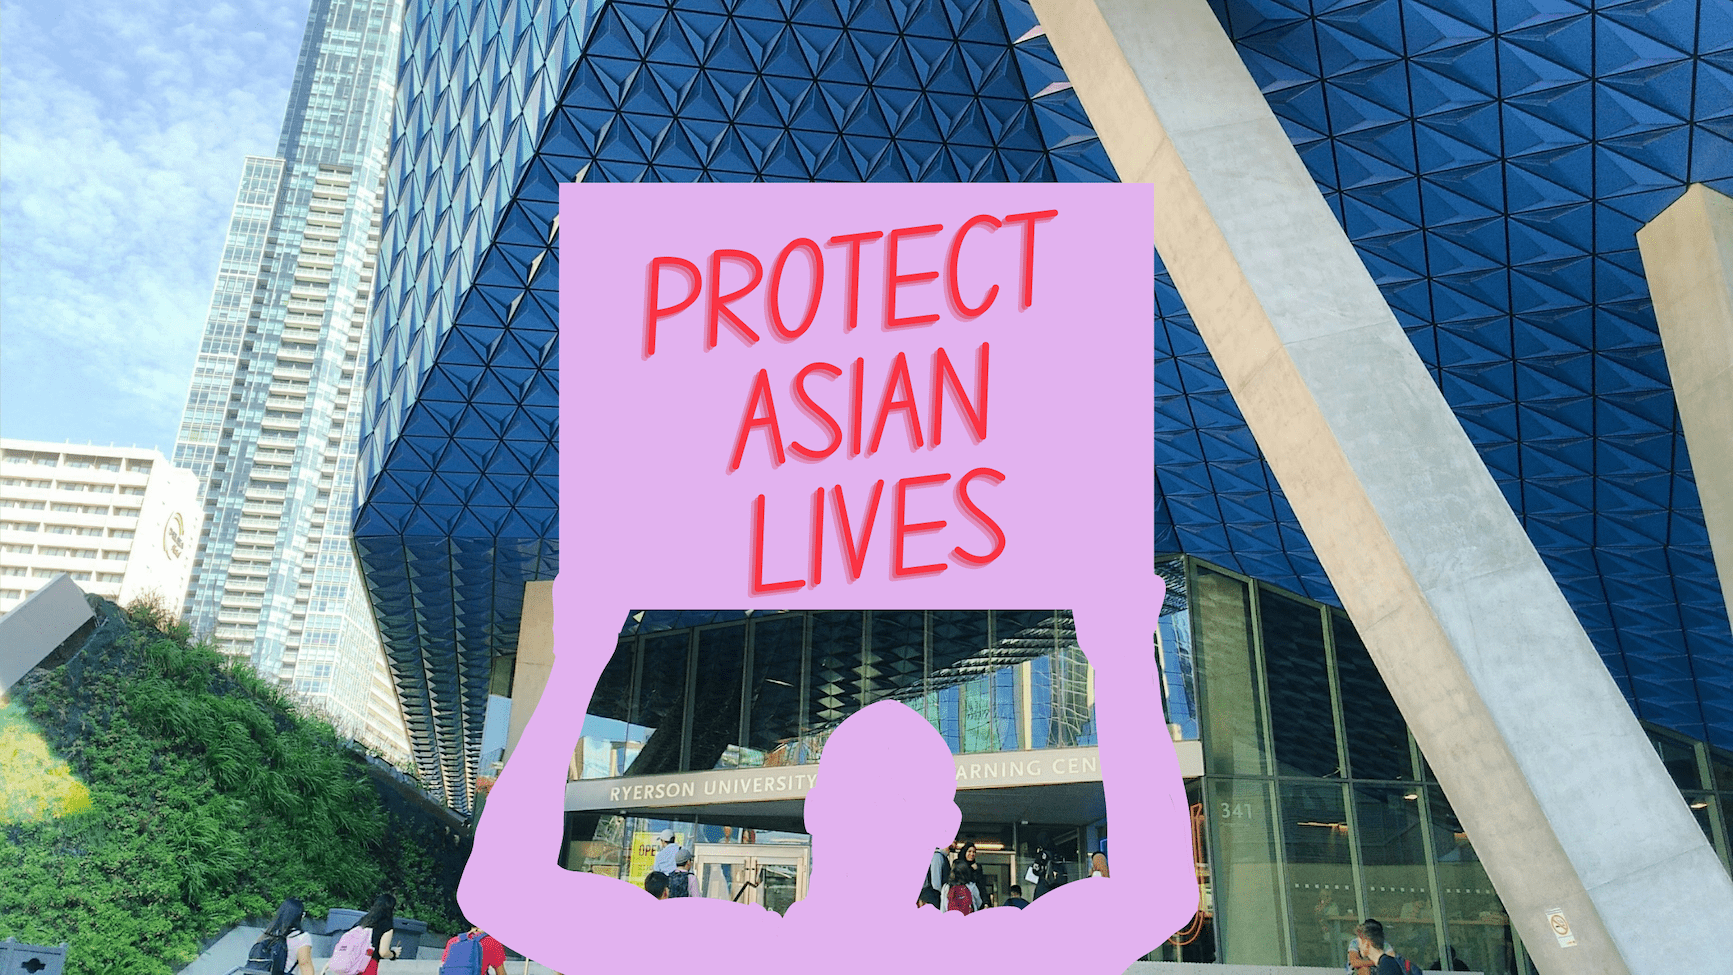 Purple silhouette of a person holding a sign that reads "Protect Asian Lives" in all capital letters standing in front of a photo of the Student Learning Centre at Ryerson University.